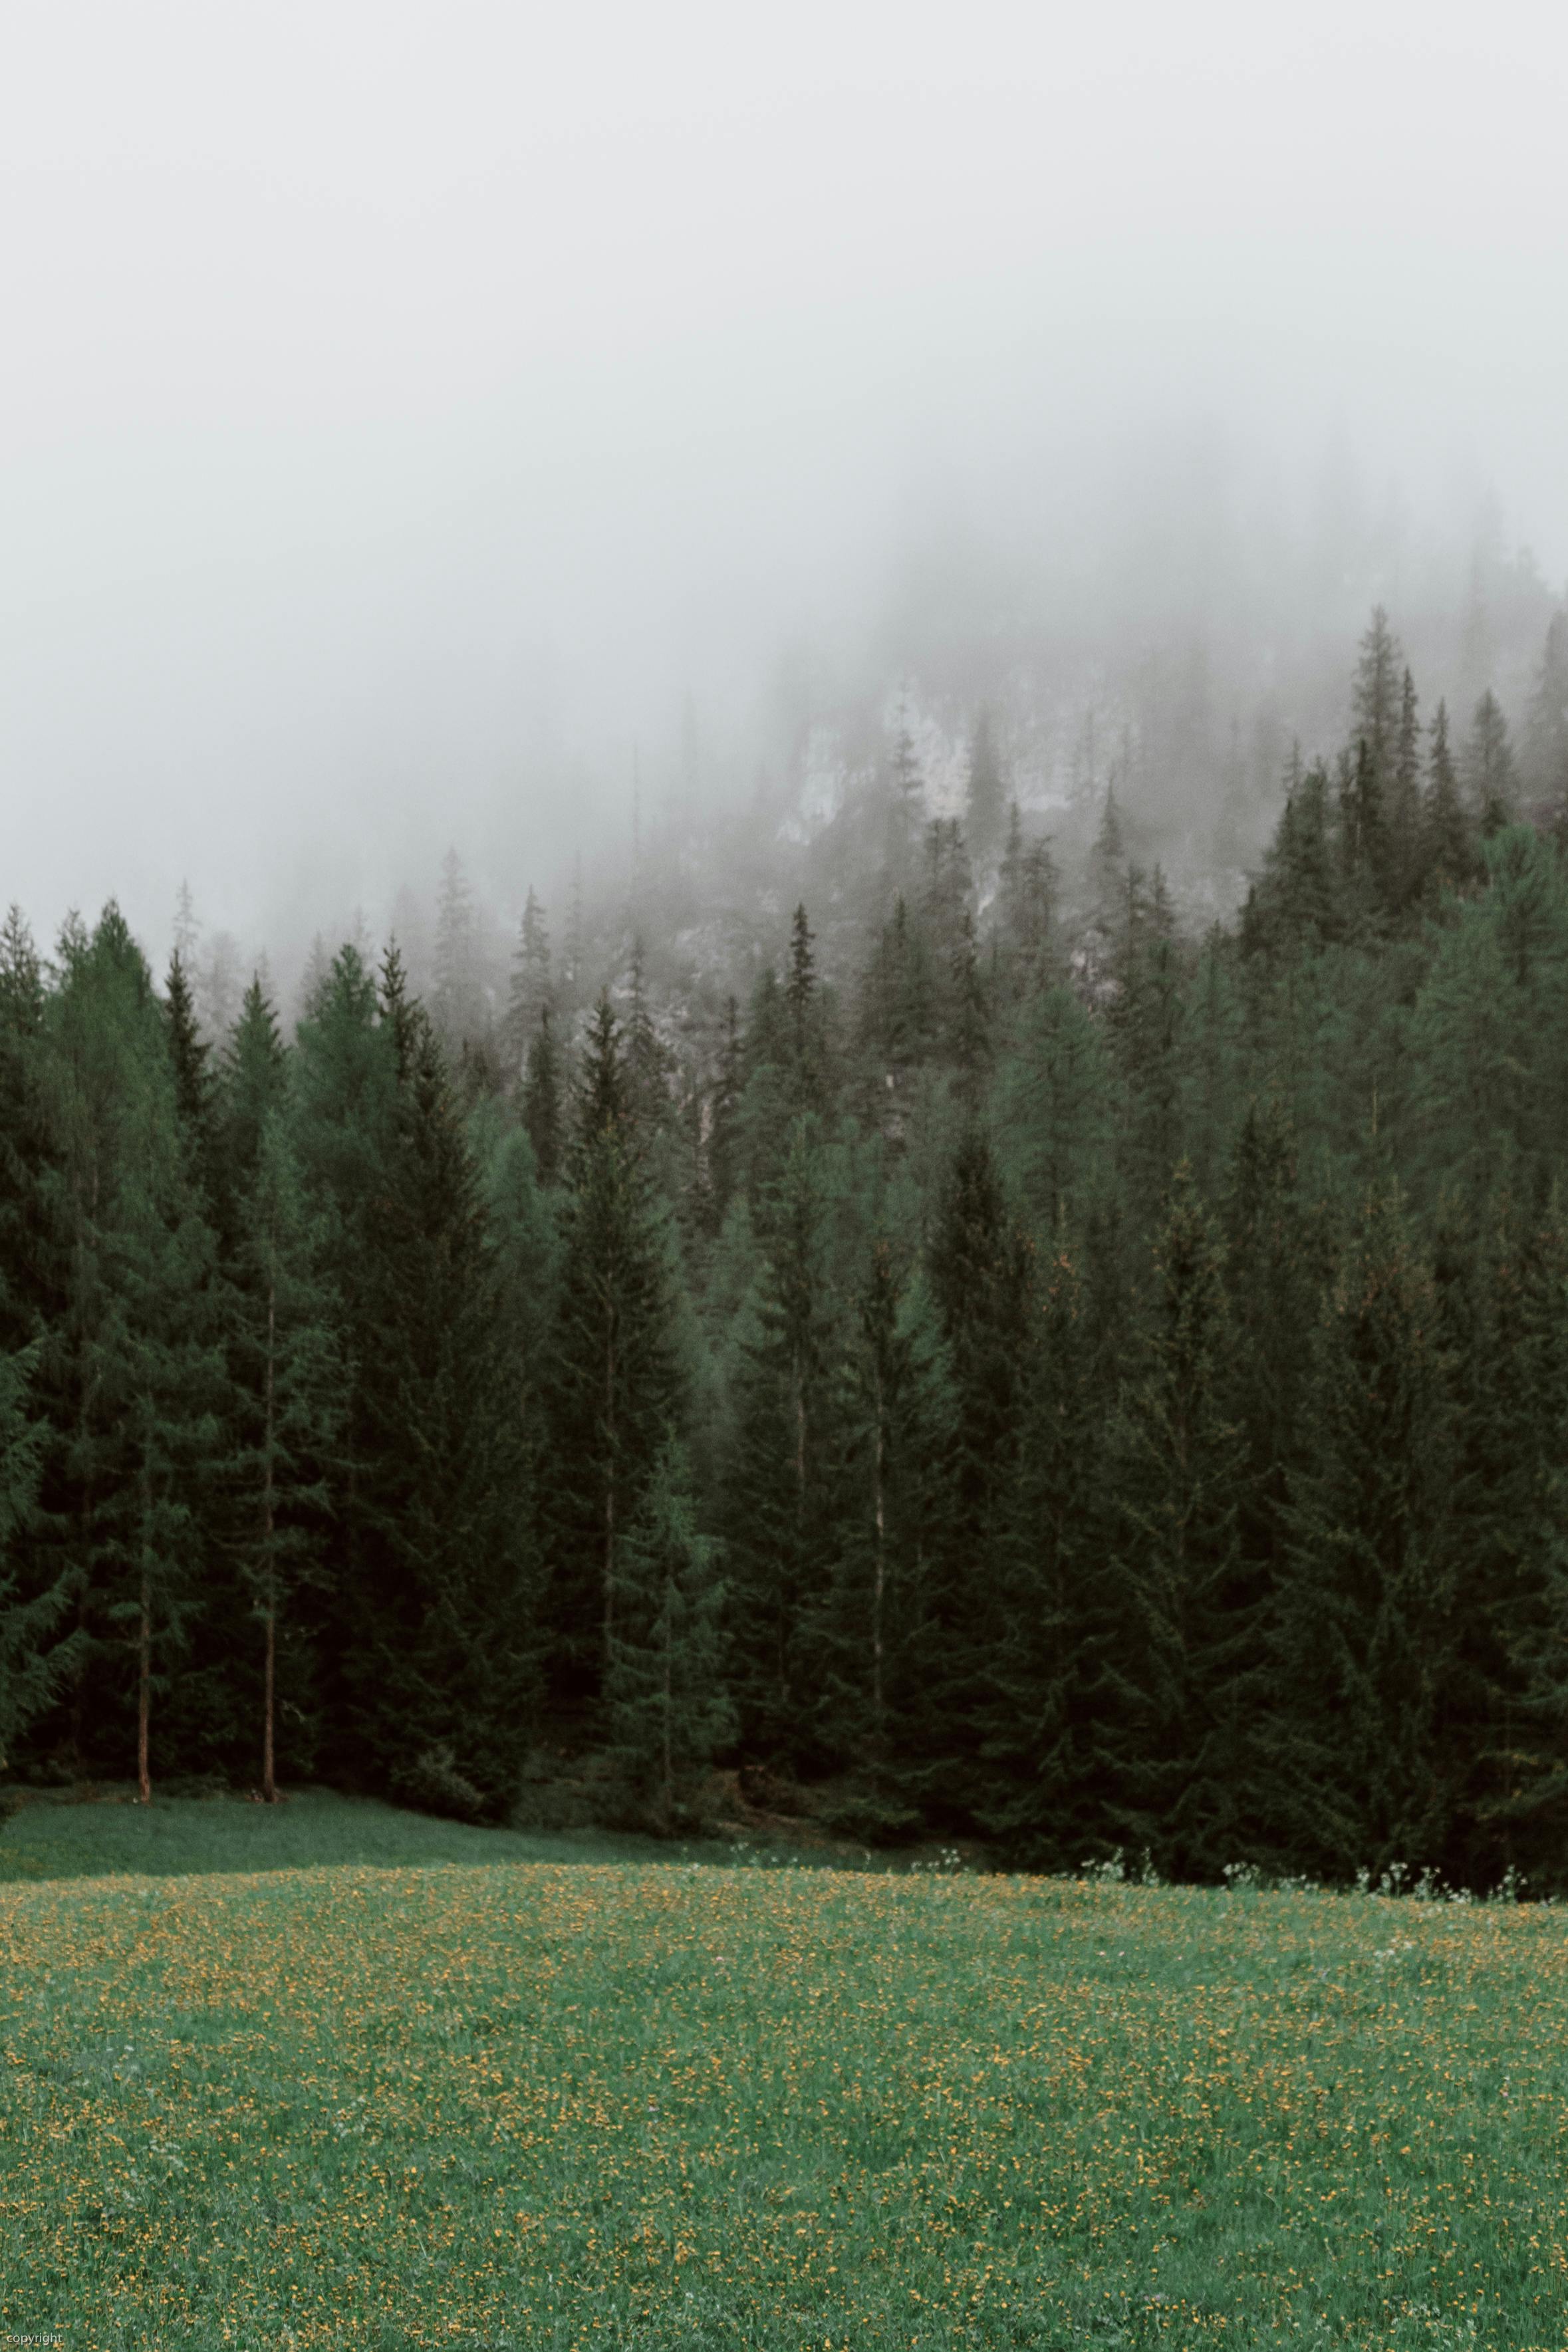 Forrest Of Green Pine Trees On Mountainside With Rain Stock Photo